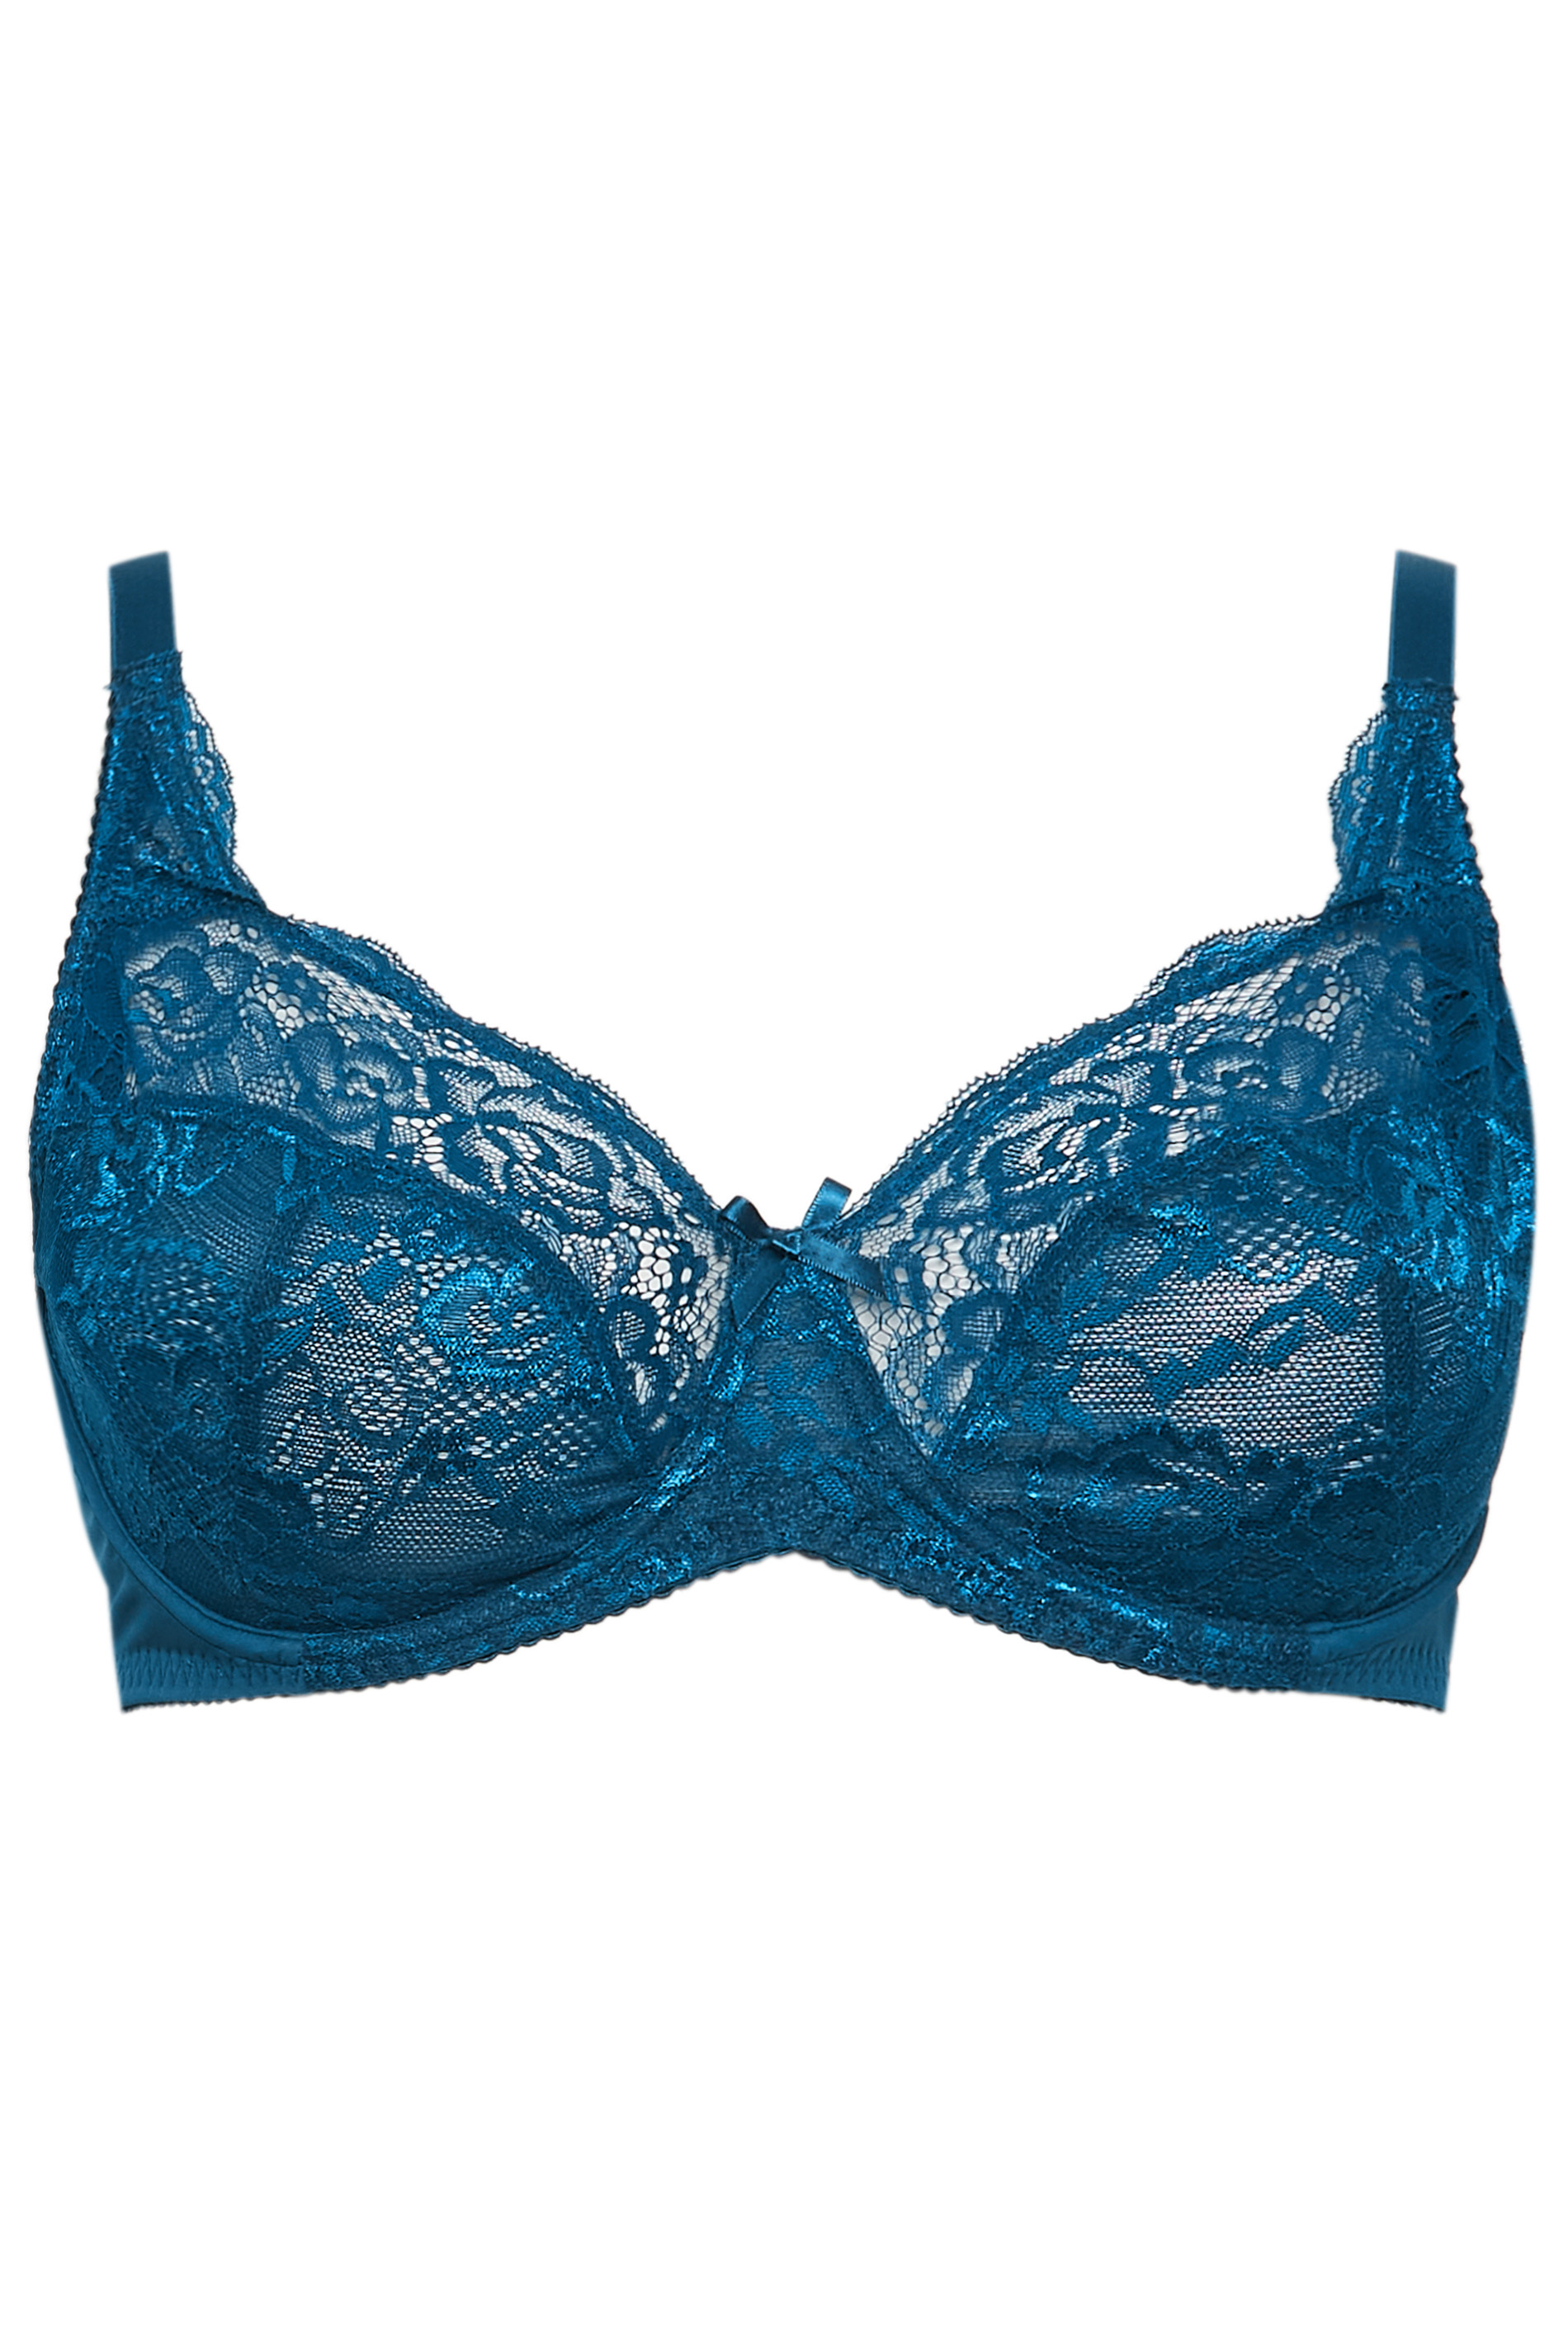 Cobalt Blue Stretch Lace Non-Padded Underwired Balcony Bra